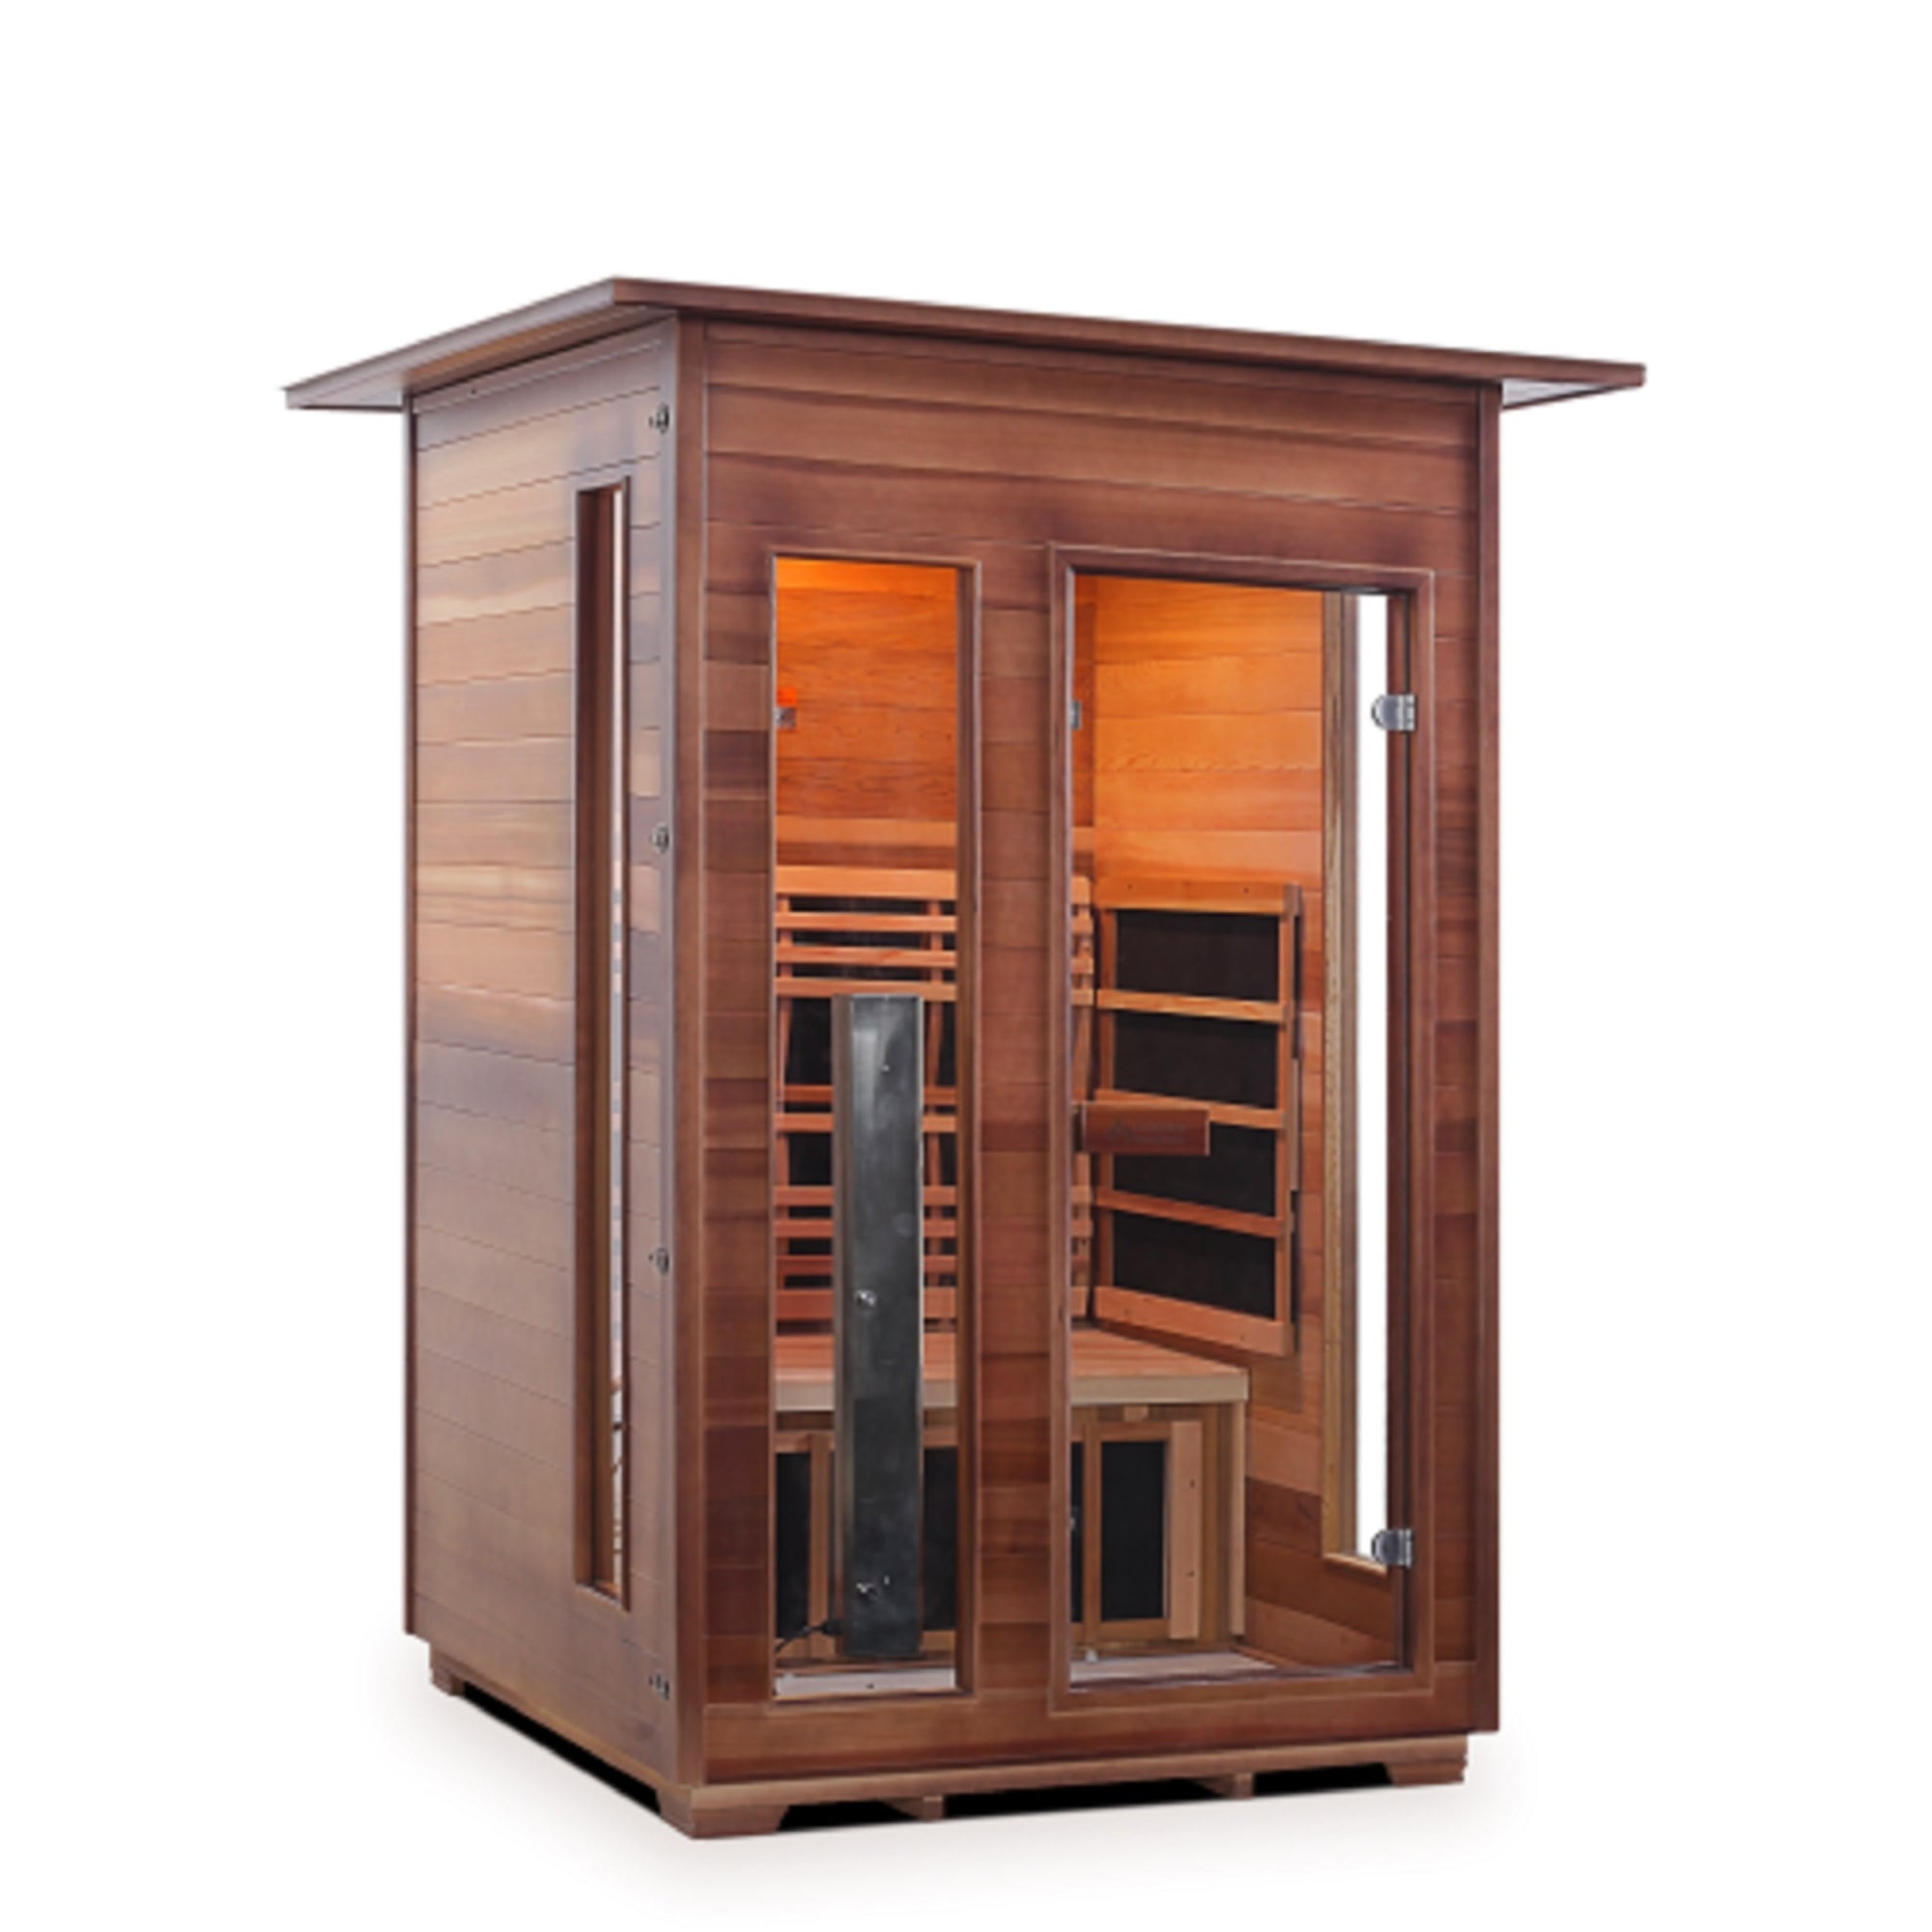 Enlighten sauna Infrared and Dry Traditional Hybrid Diamond 2 Person Indoor roofed Canadian Red Cedar Wood Outside And Inside with glass door isometric view